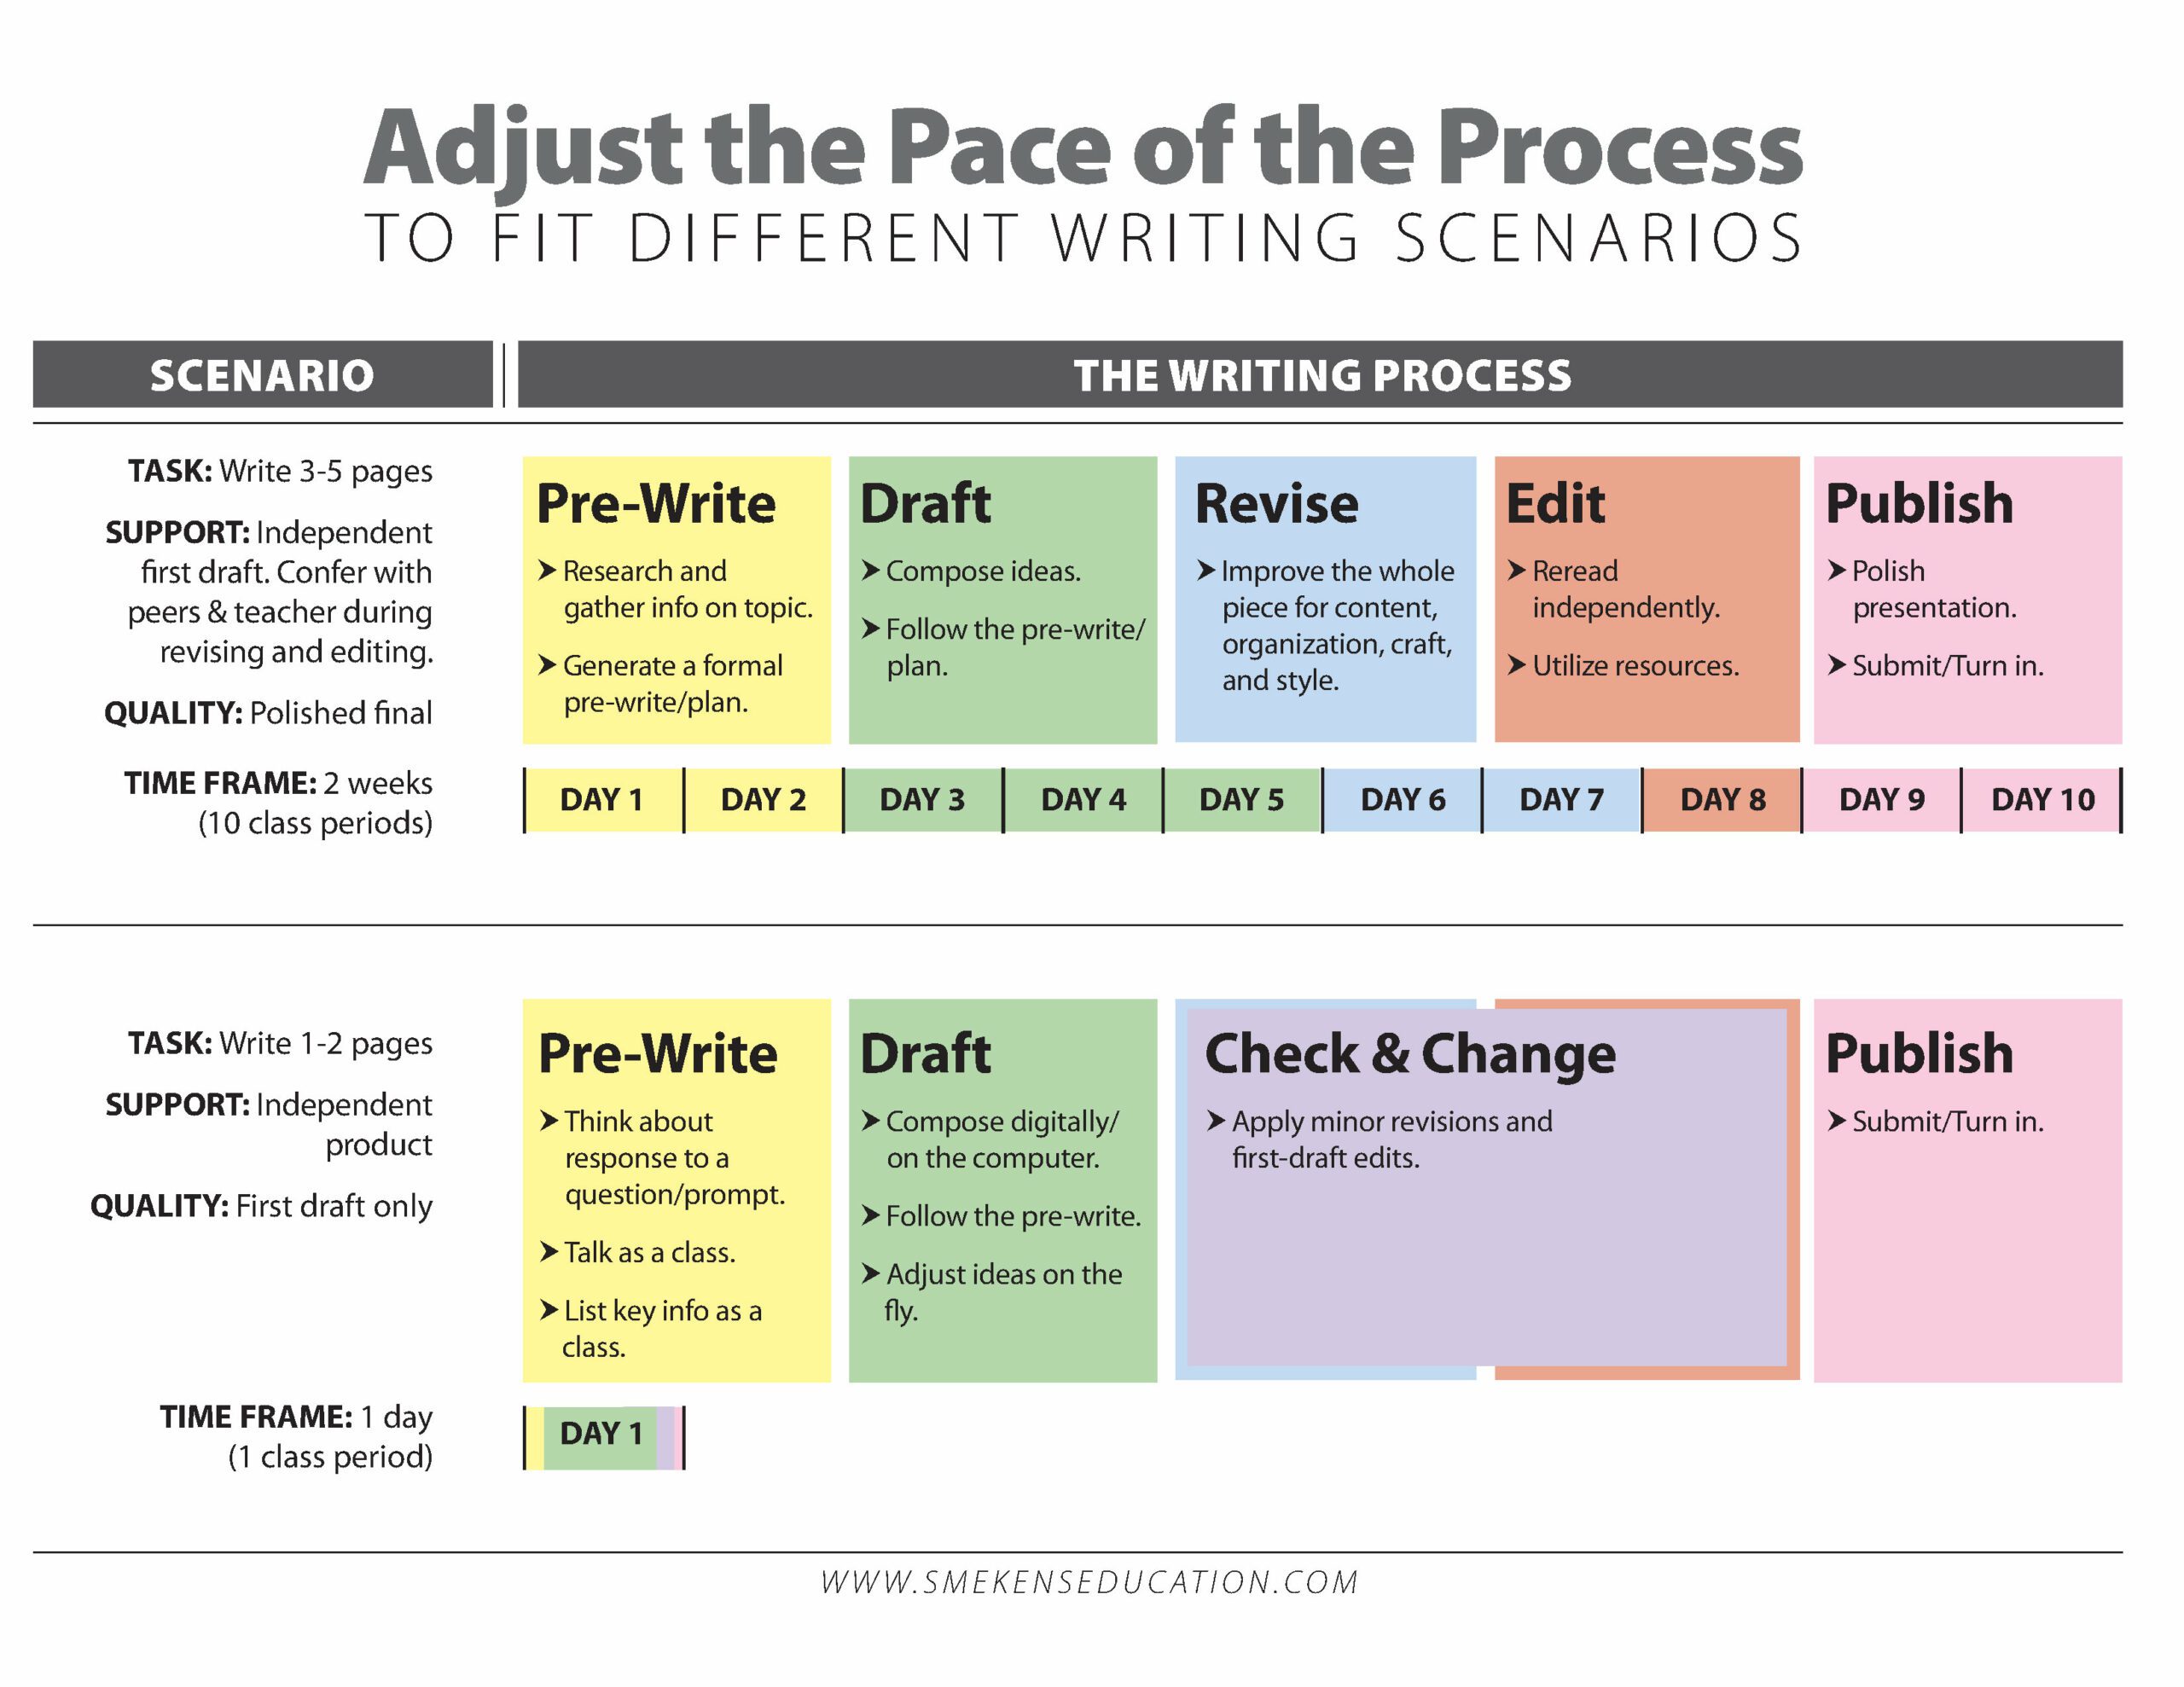 Adjust the Pace of the Writing Process - Teacher Resource